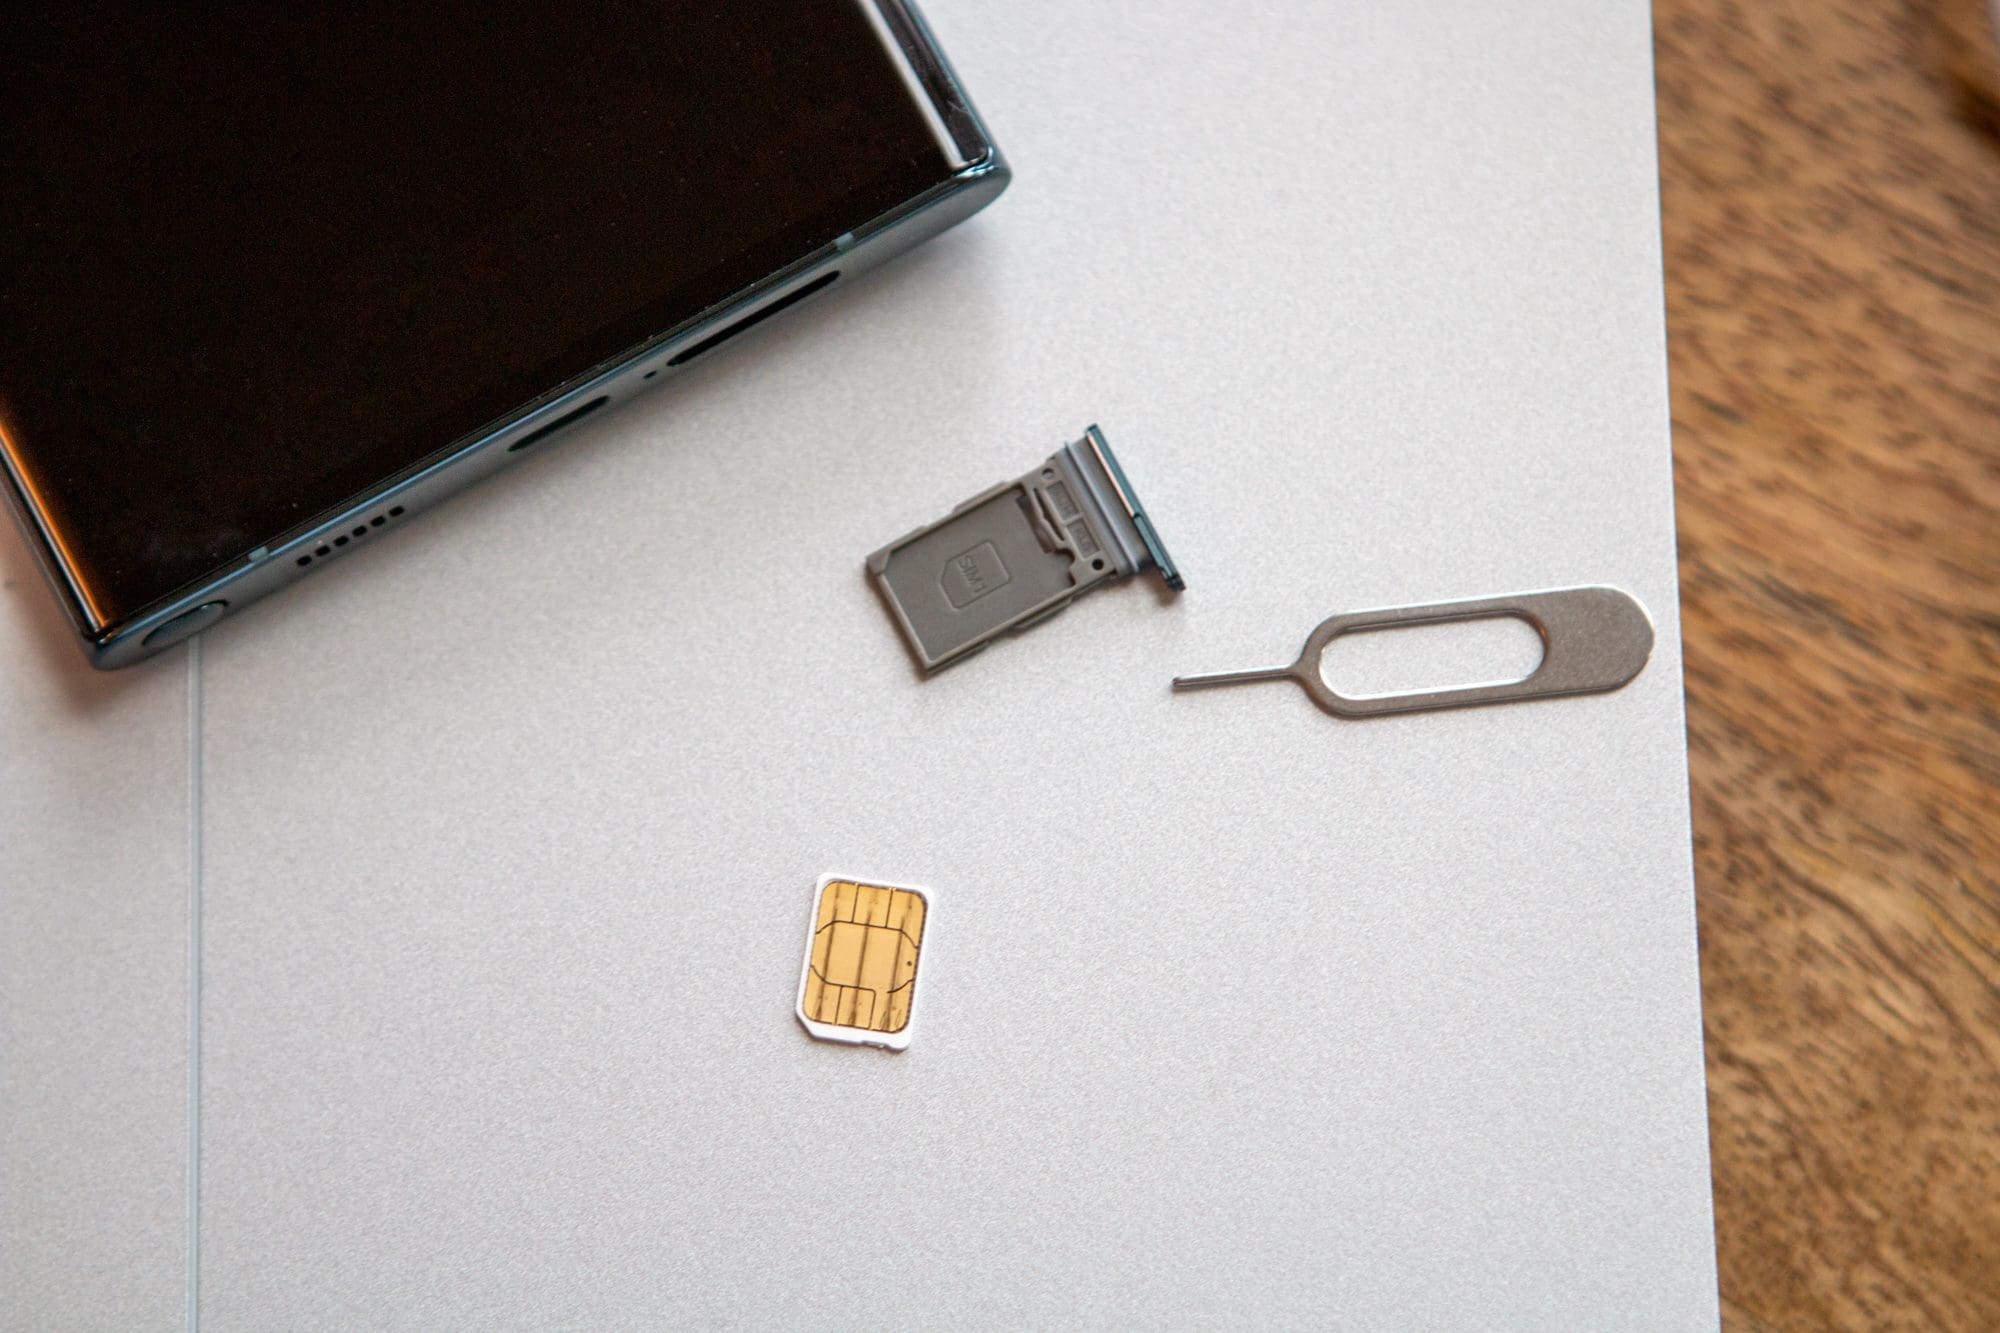 Recognizing Signs Of Water Damage On A SIM Card